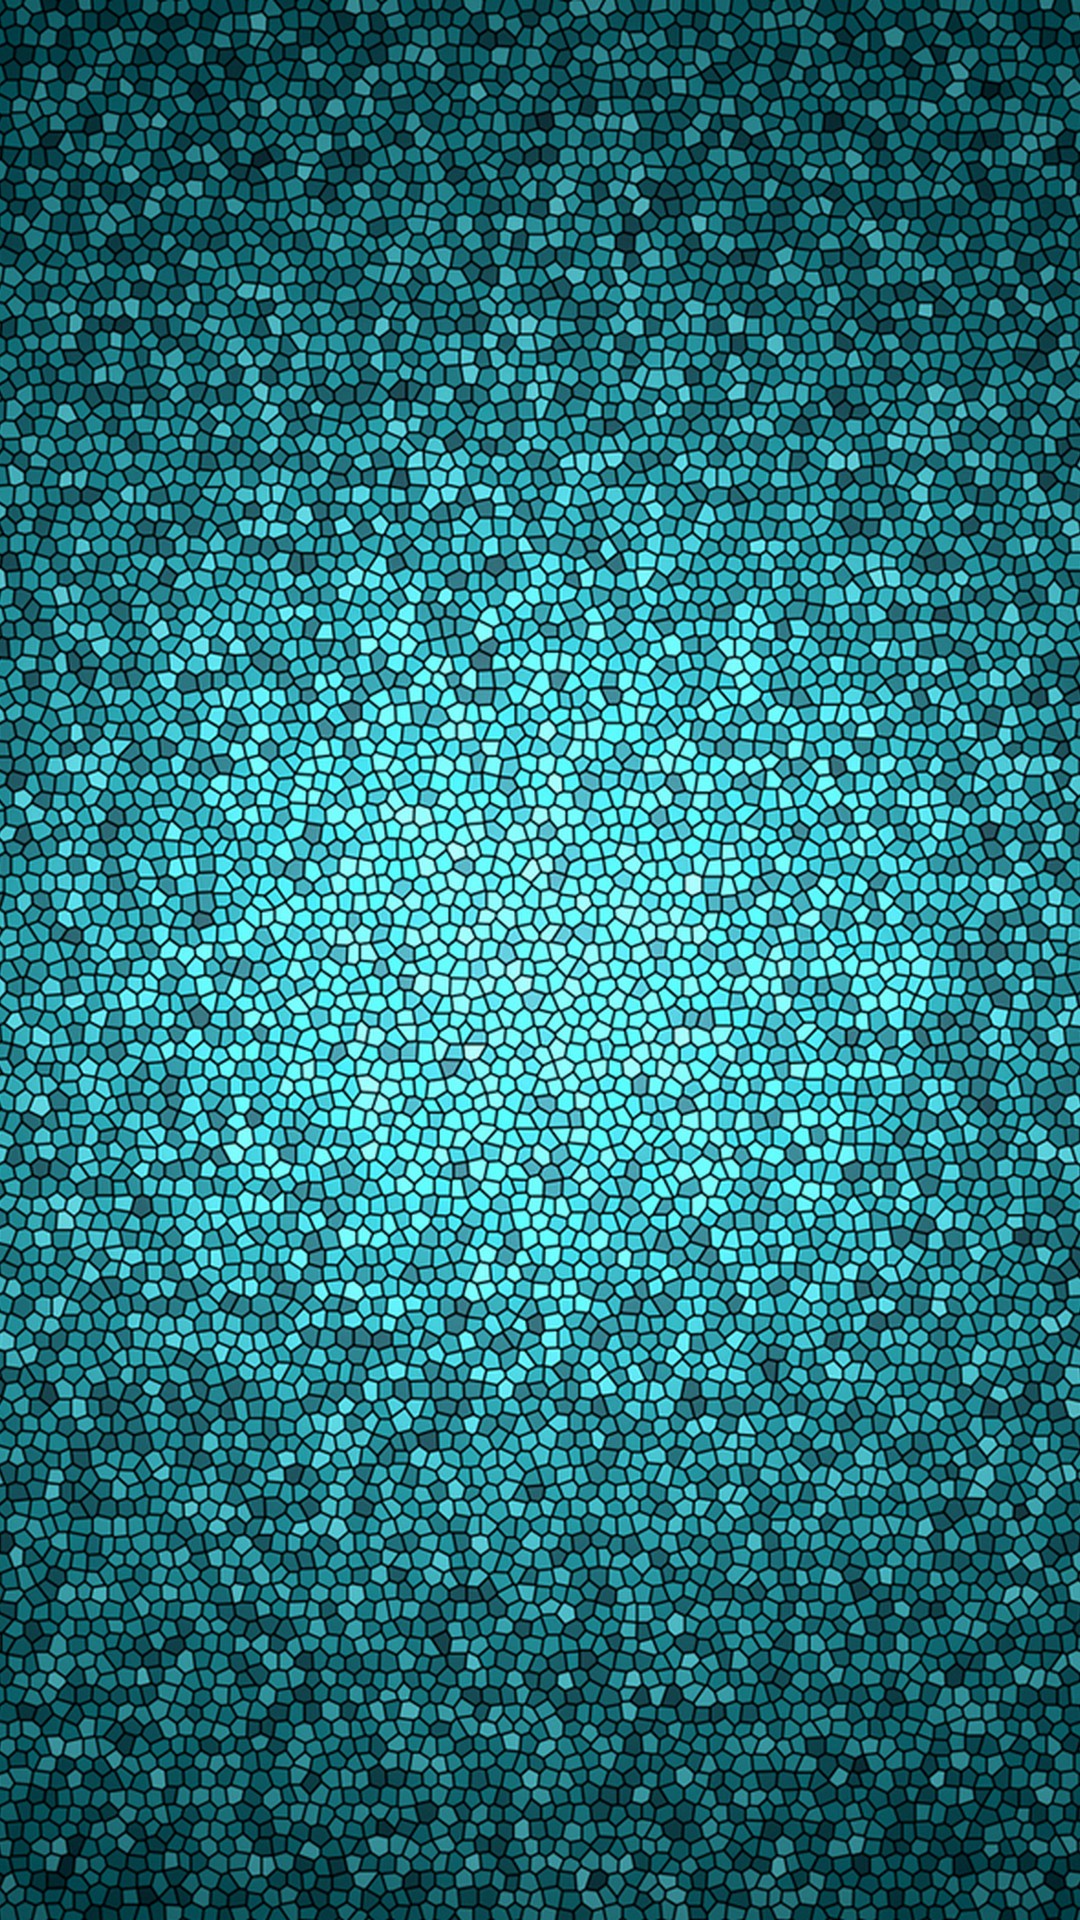 Teal Phone Backgrounds With Resolution 1080X1920 pixel. You can make this wallpaper for your Desktop Computer Backgrounds, Mac Wallpapers, Android Lock screen or iPhone Screensavers